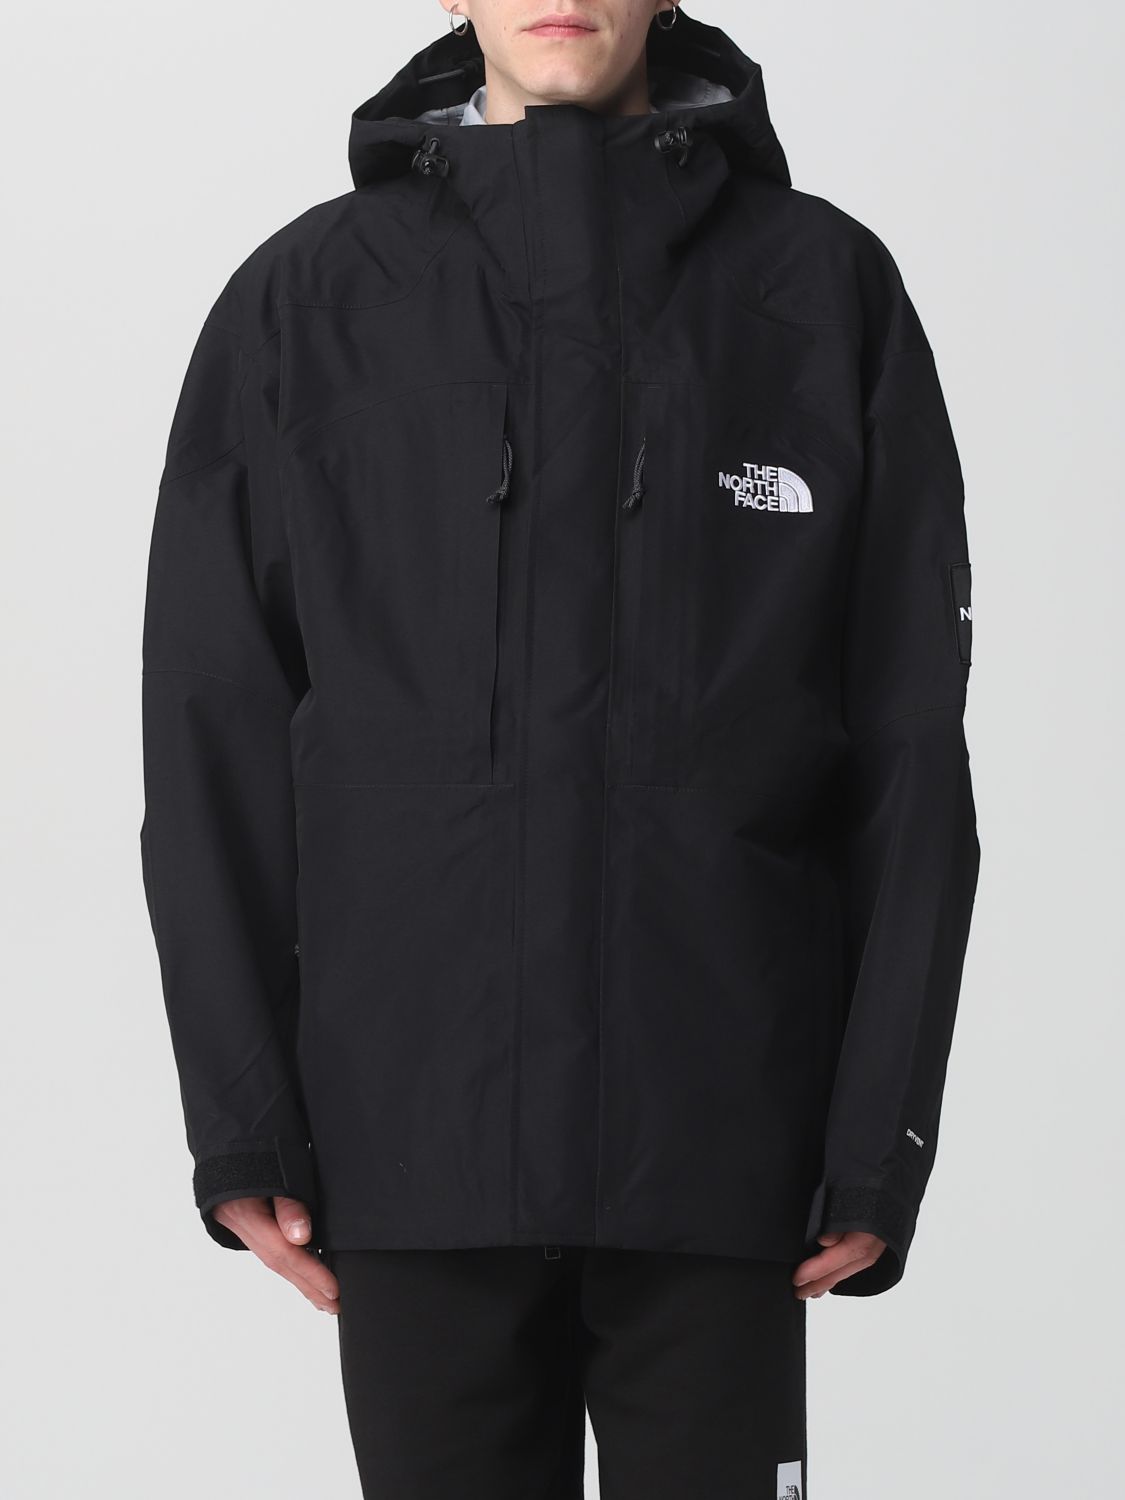 Giacca The North Face: Giacca Carduelis Dryvent™ 3L The North Face in tessuto sintetico nero 1